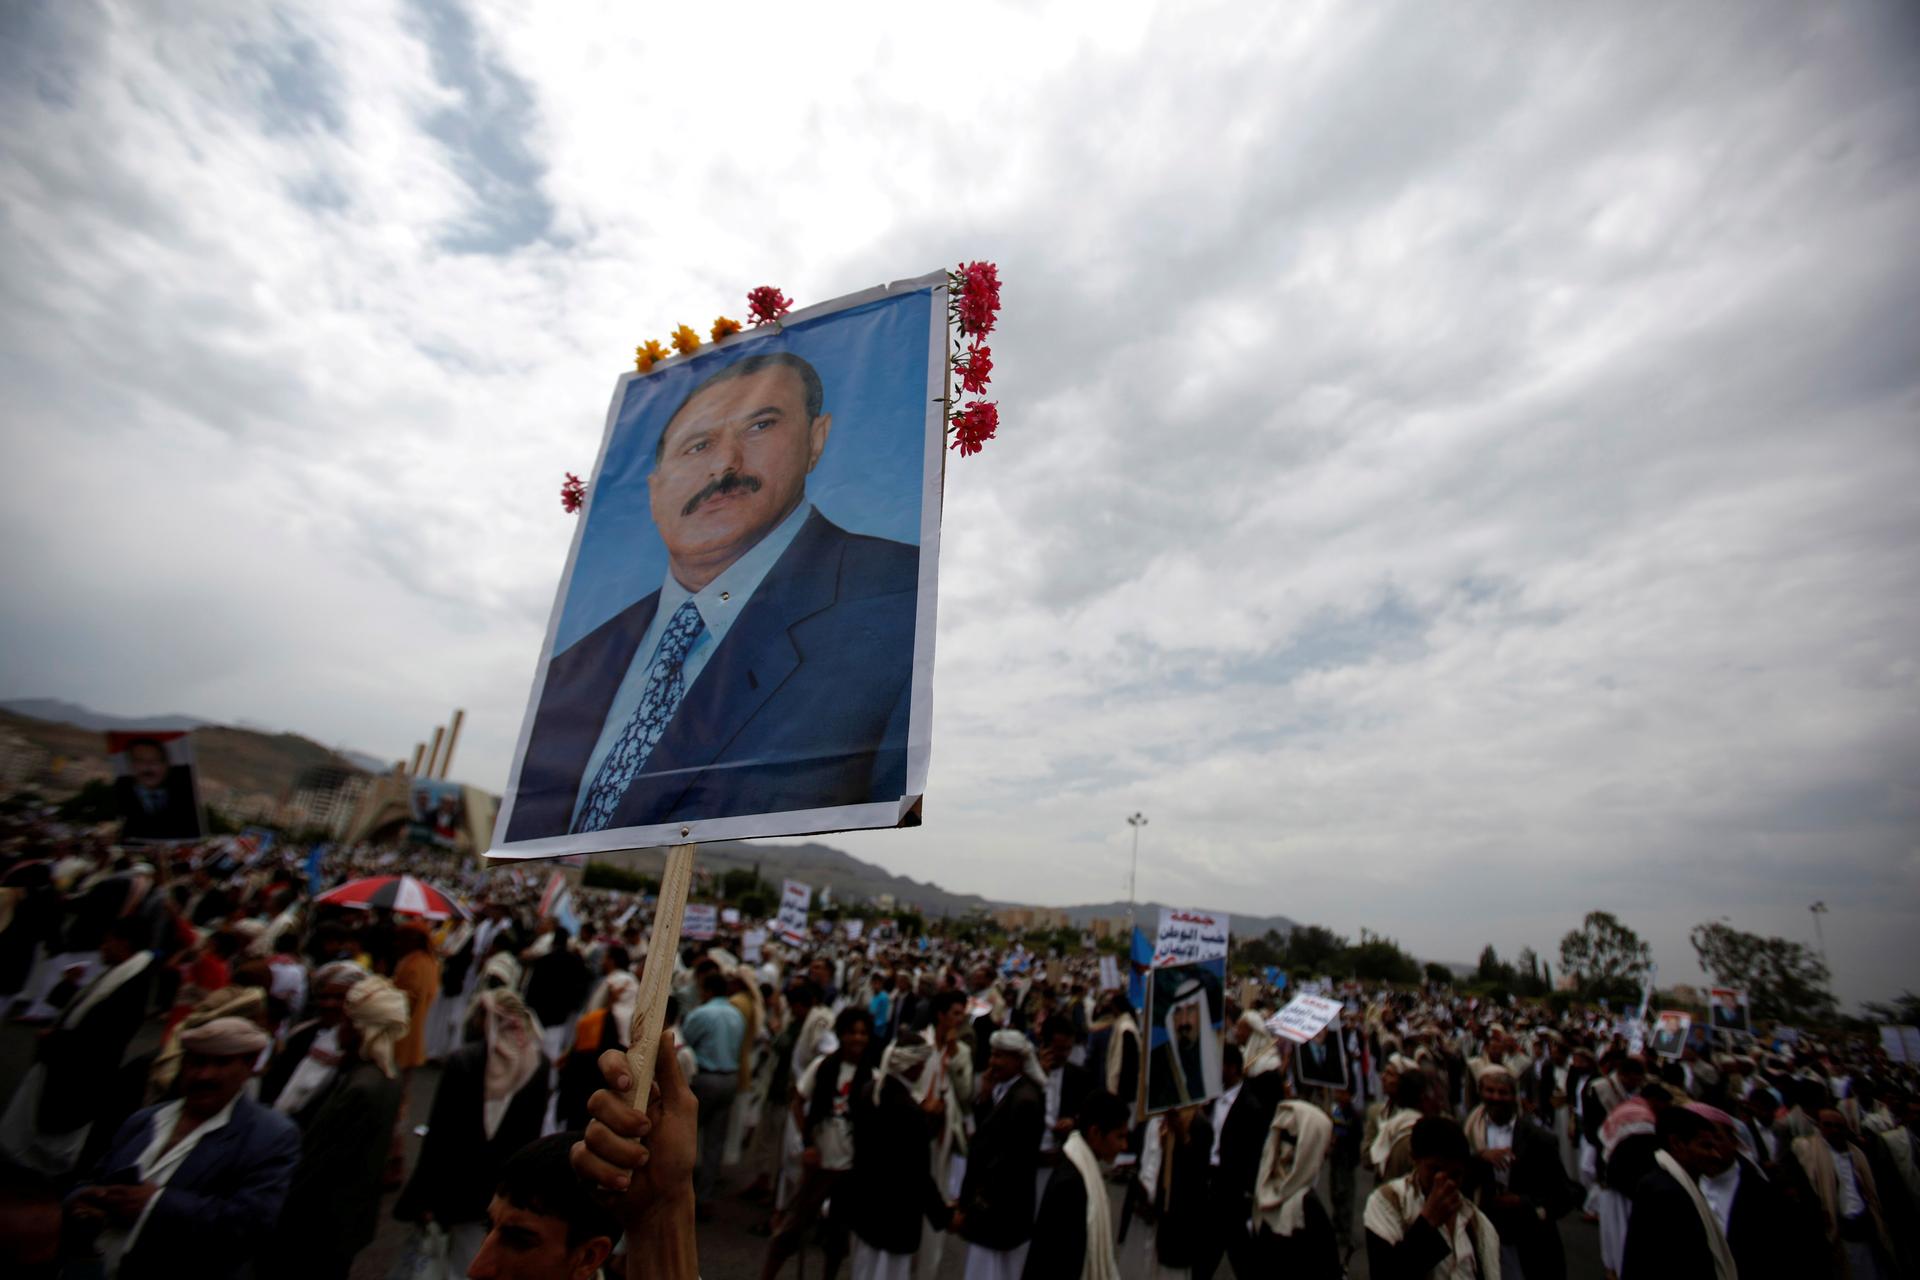  A supporter of Yemen's then President Ali Abdullah Saleh waves a poster featuring him during a rally to show support for him in Sanaa